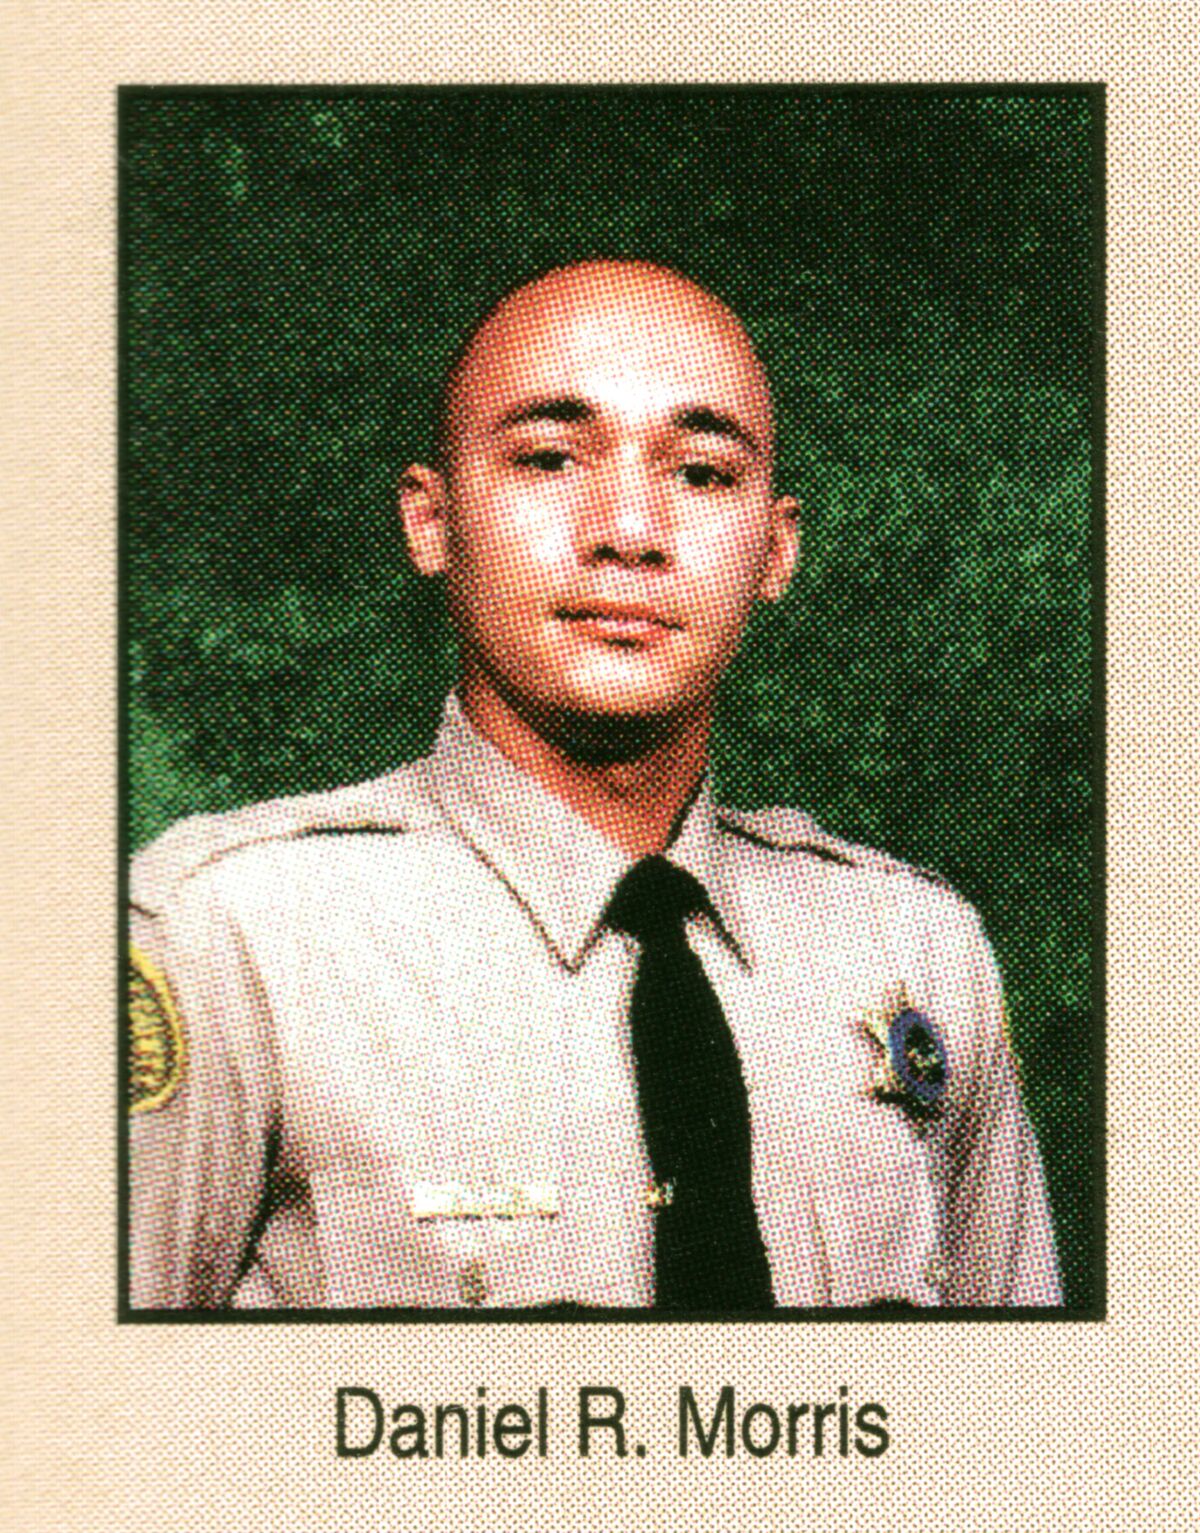 Homicide Det. Daniel Morris was disciplined in 2005 for violating the L.A. County Sheriff's Department policies regarding false statements and was placed on a "Brady list" of deputies whose credibility could be called into question. He has testified in numerous cases since receiving the discipline.